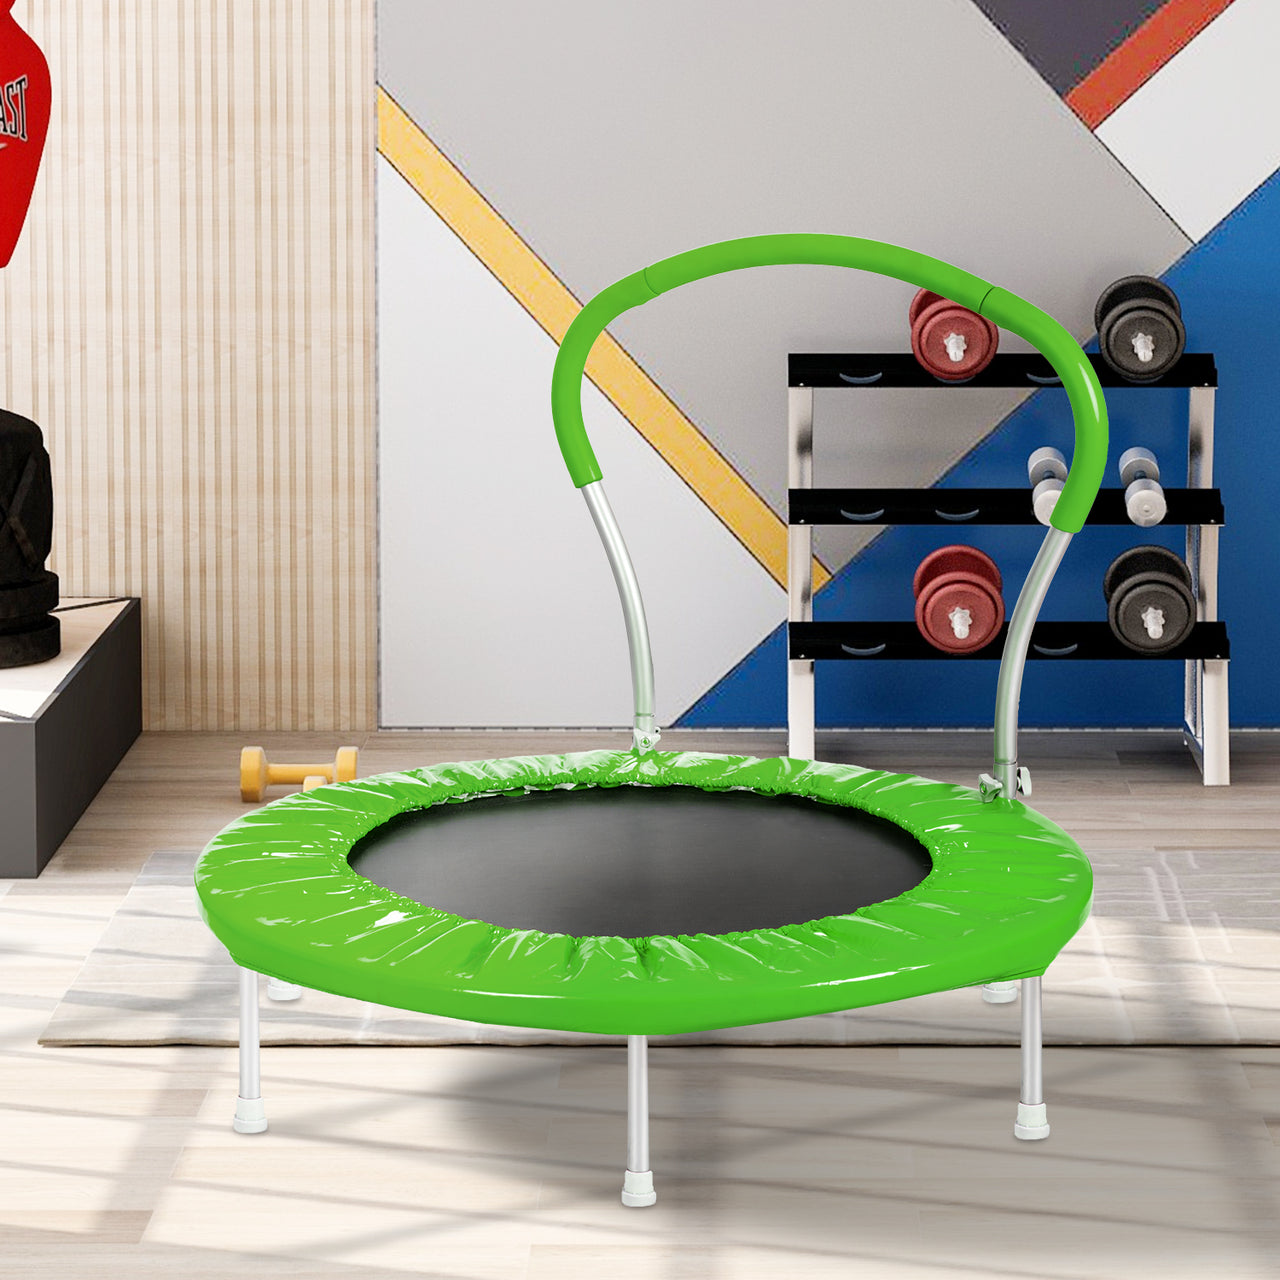 36 INCH TRAMPOLINE WITH HANDLE(GR) Six Legs For Secure Stability